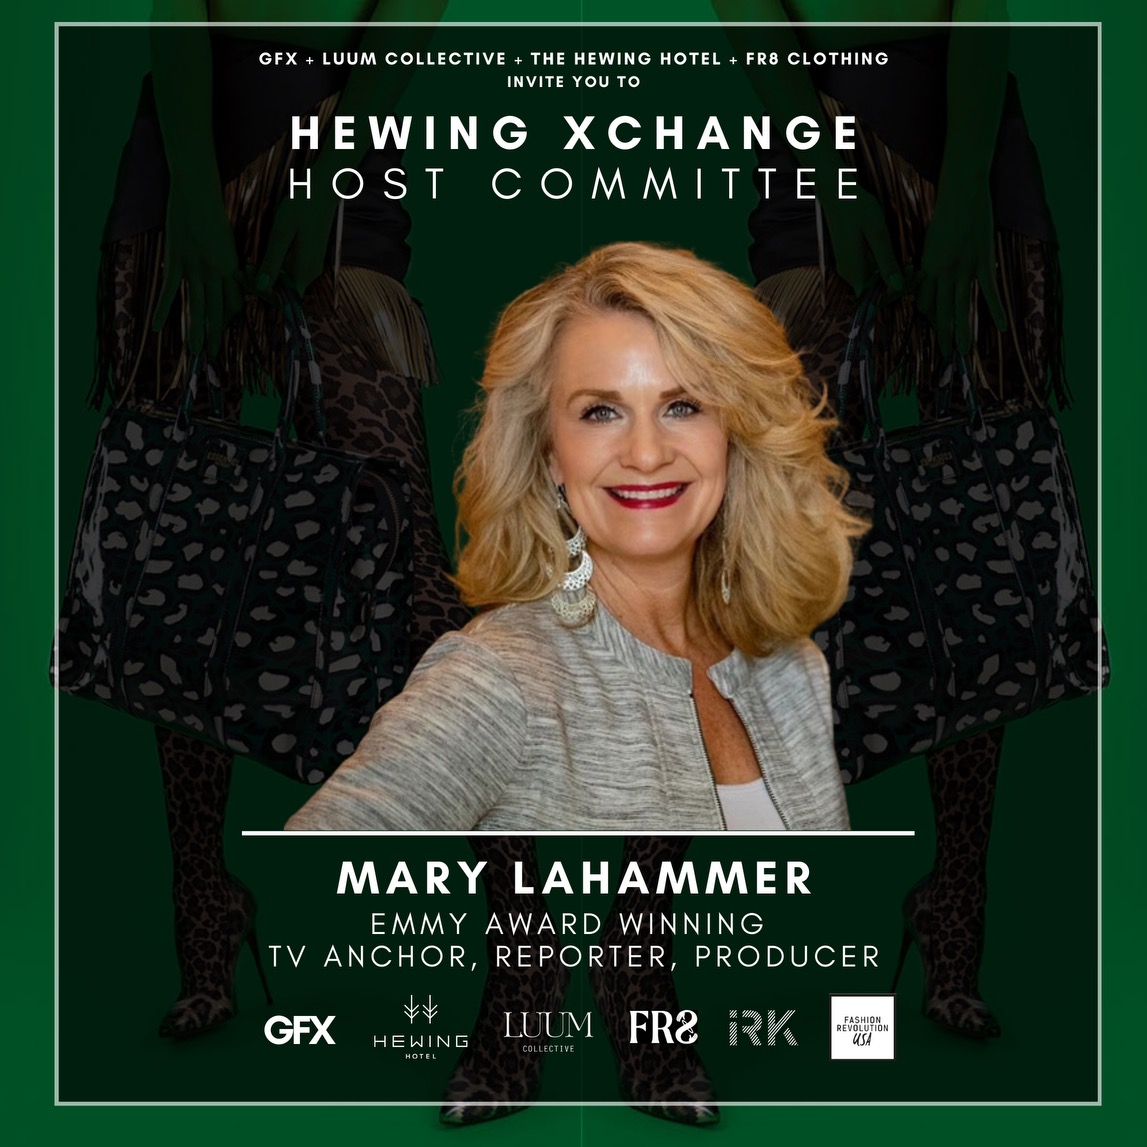 Celebrate Earth Day in style at the highly anticipated Earth Day Edition of Hewing xChange. Join TPT's @mlahammer at this unique fashion upcycling event. To learn more visit fb.me/e/5dyptqgUN. (Publish 4/19)